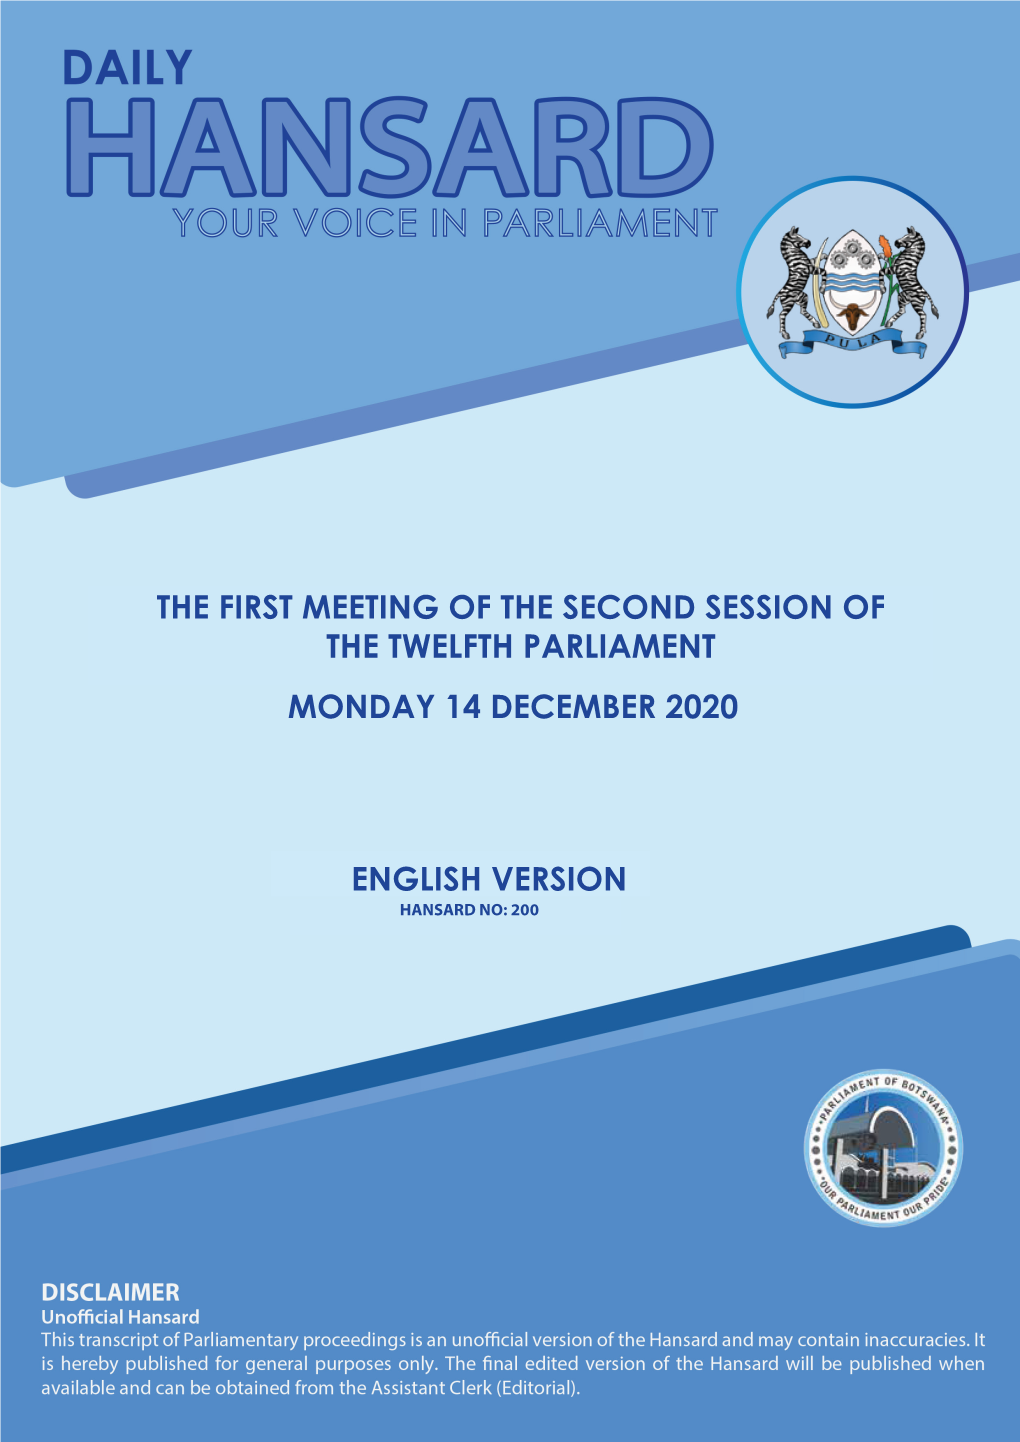 Monday 14 December 2020 the First Meeting of the Second